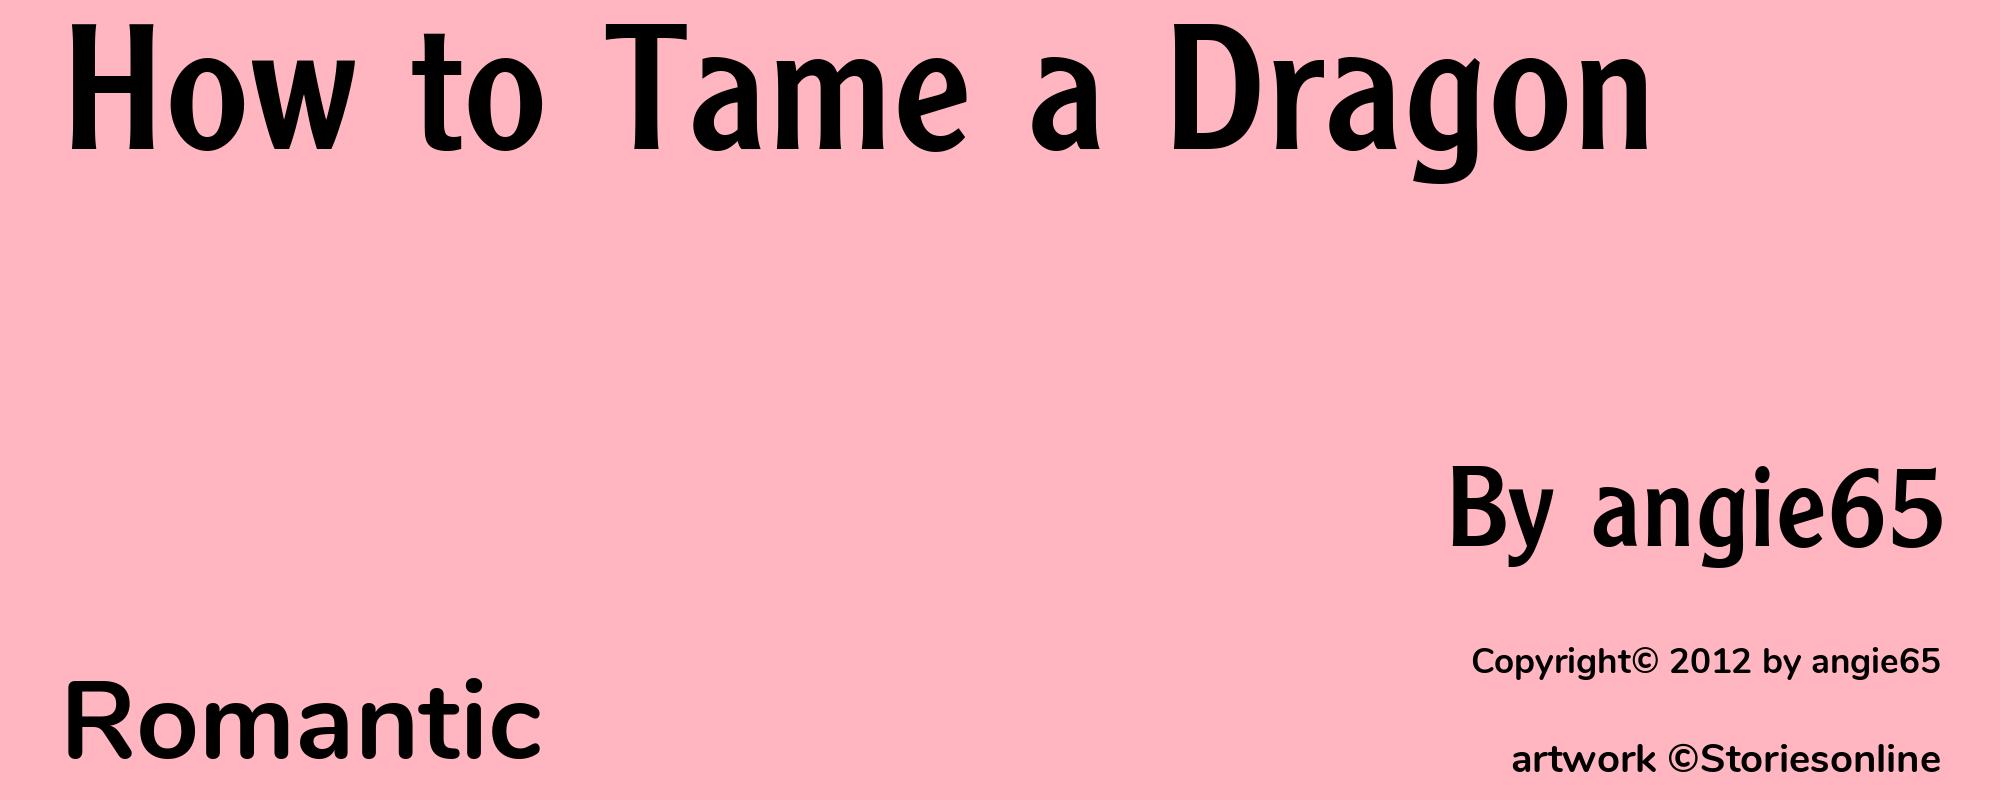 How to Tame a Dragon - Cover